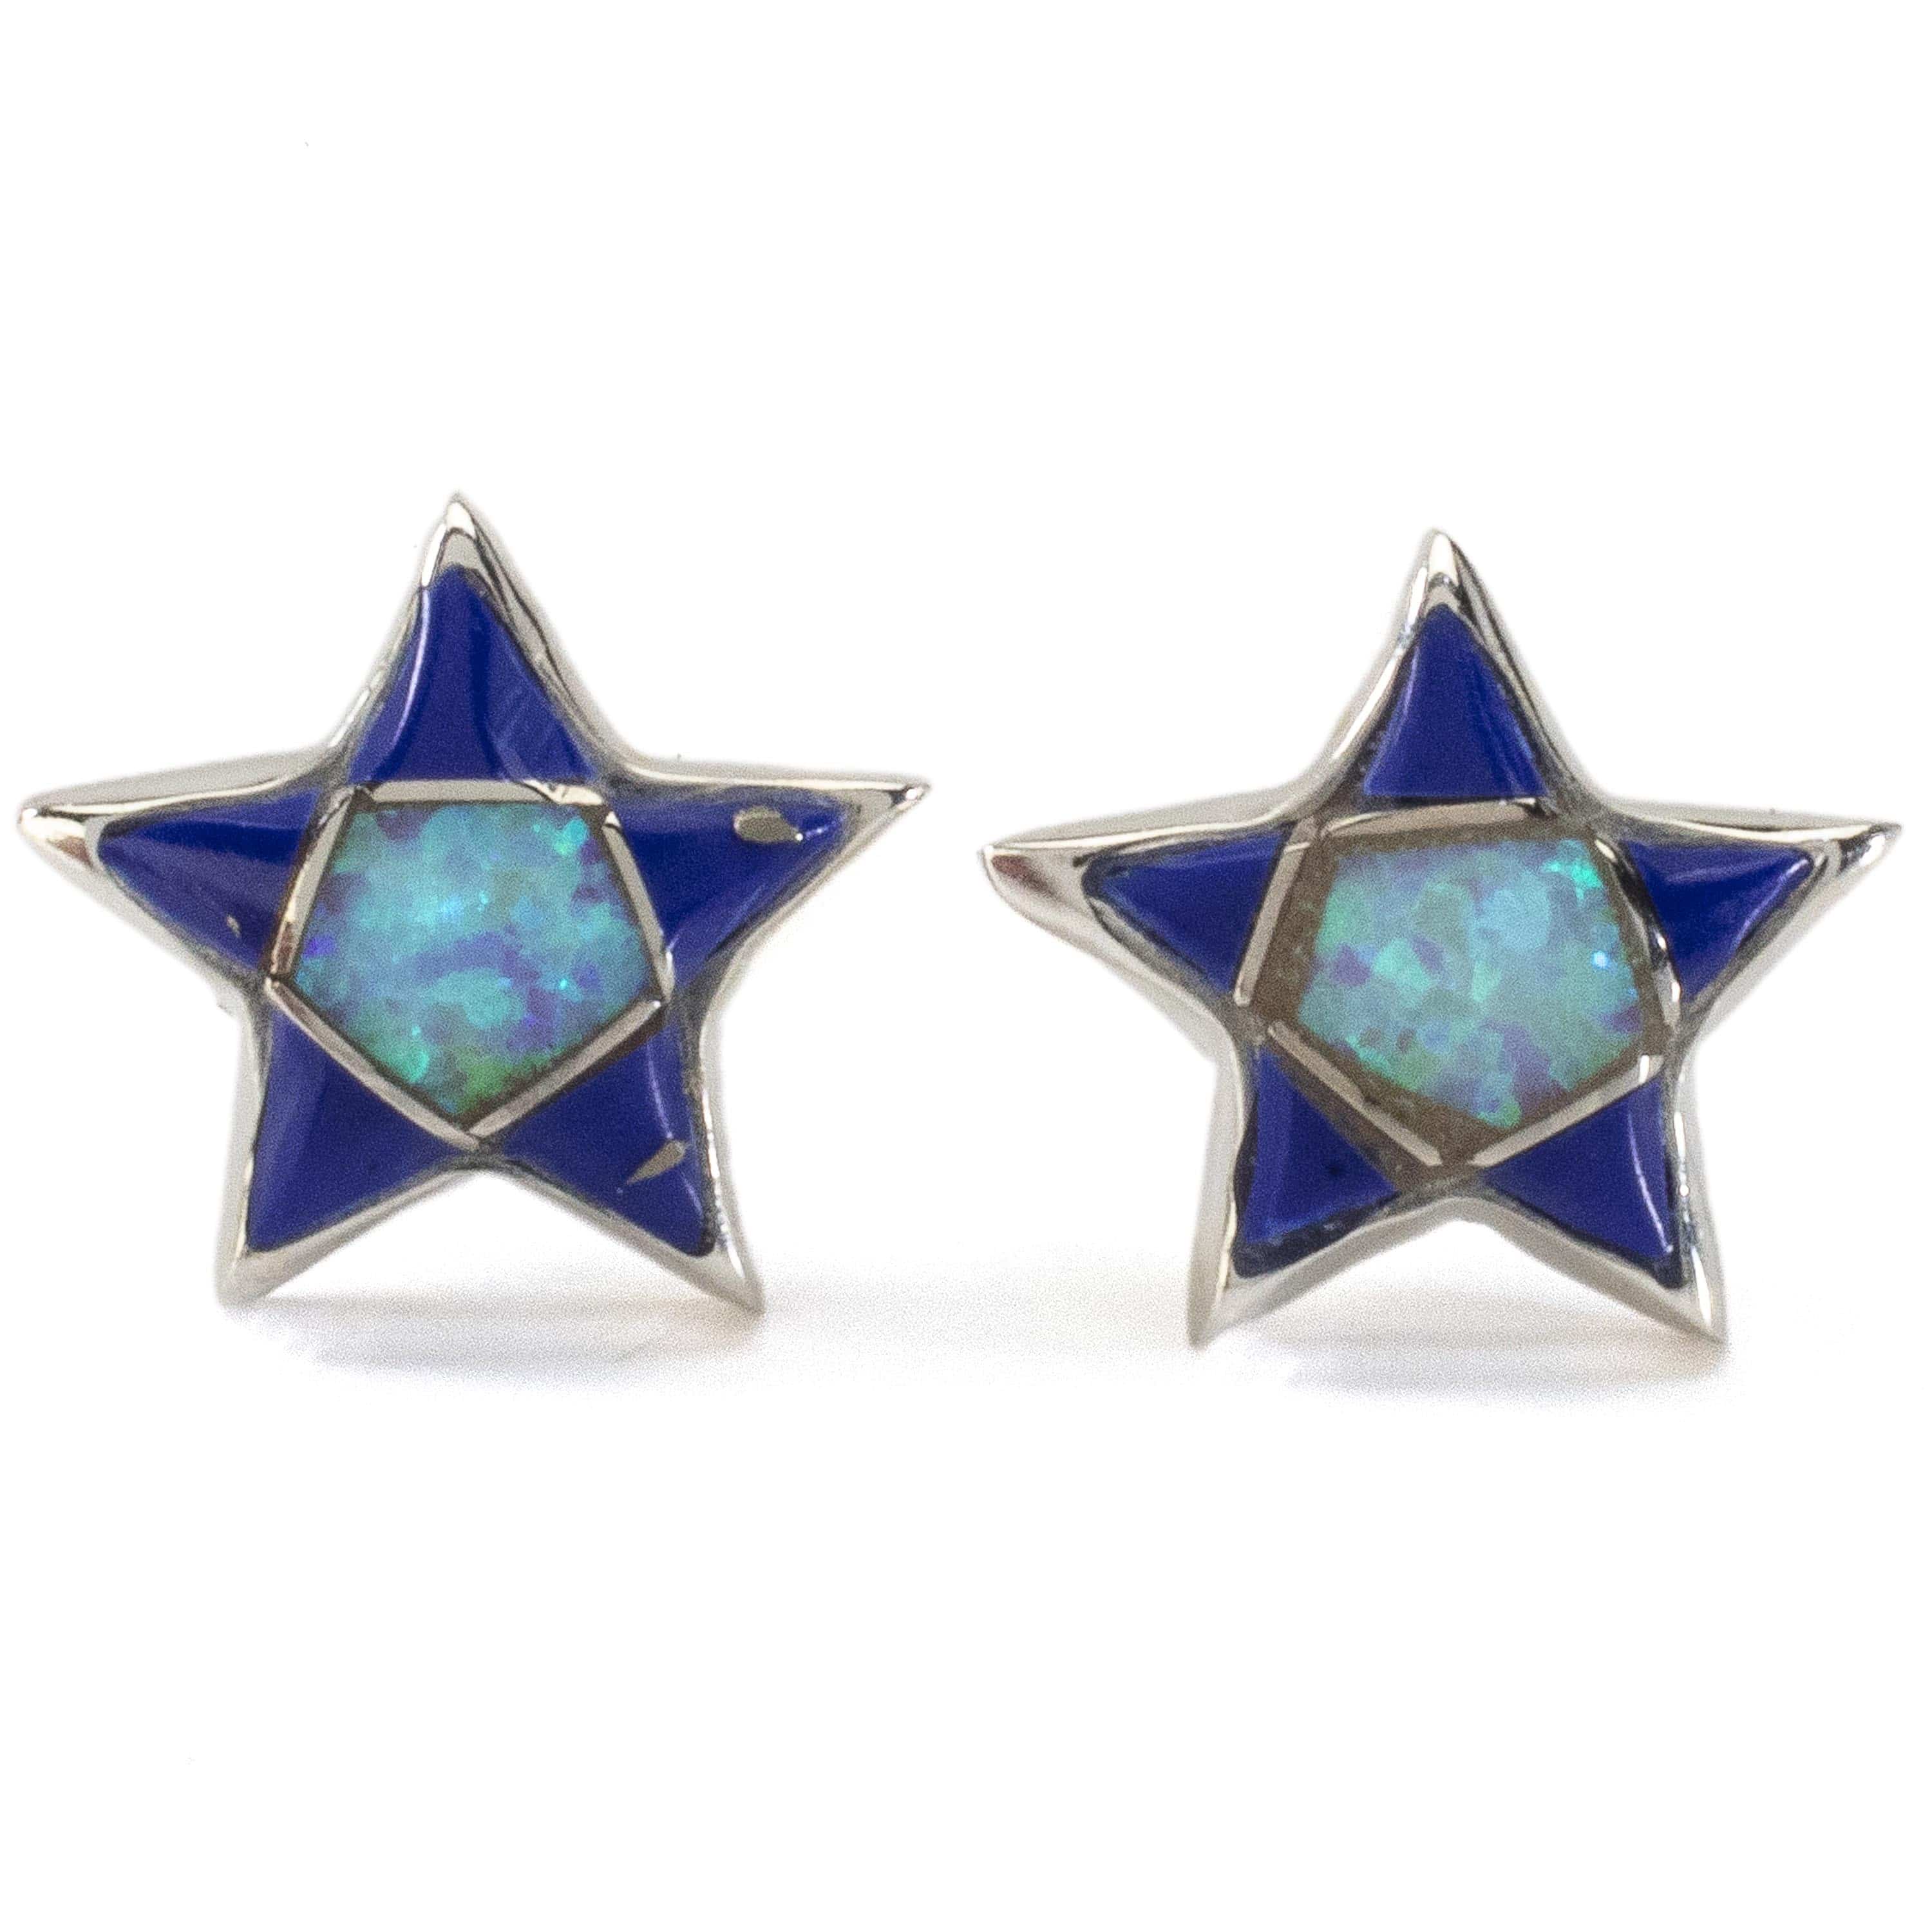 Kalifano Southwest Silver Jewelry Lapis Star Earrings Handmade with Sterling Silver and Opal Accent NME.2243.LP